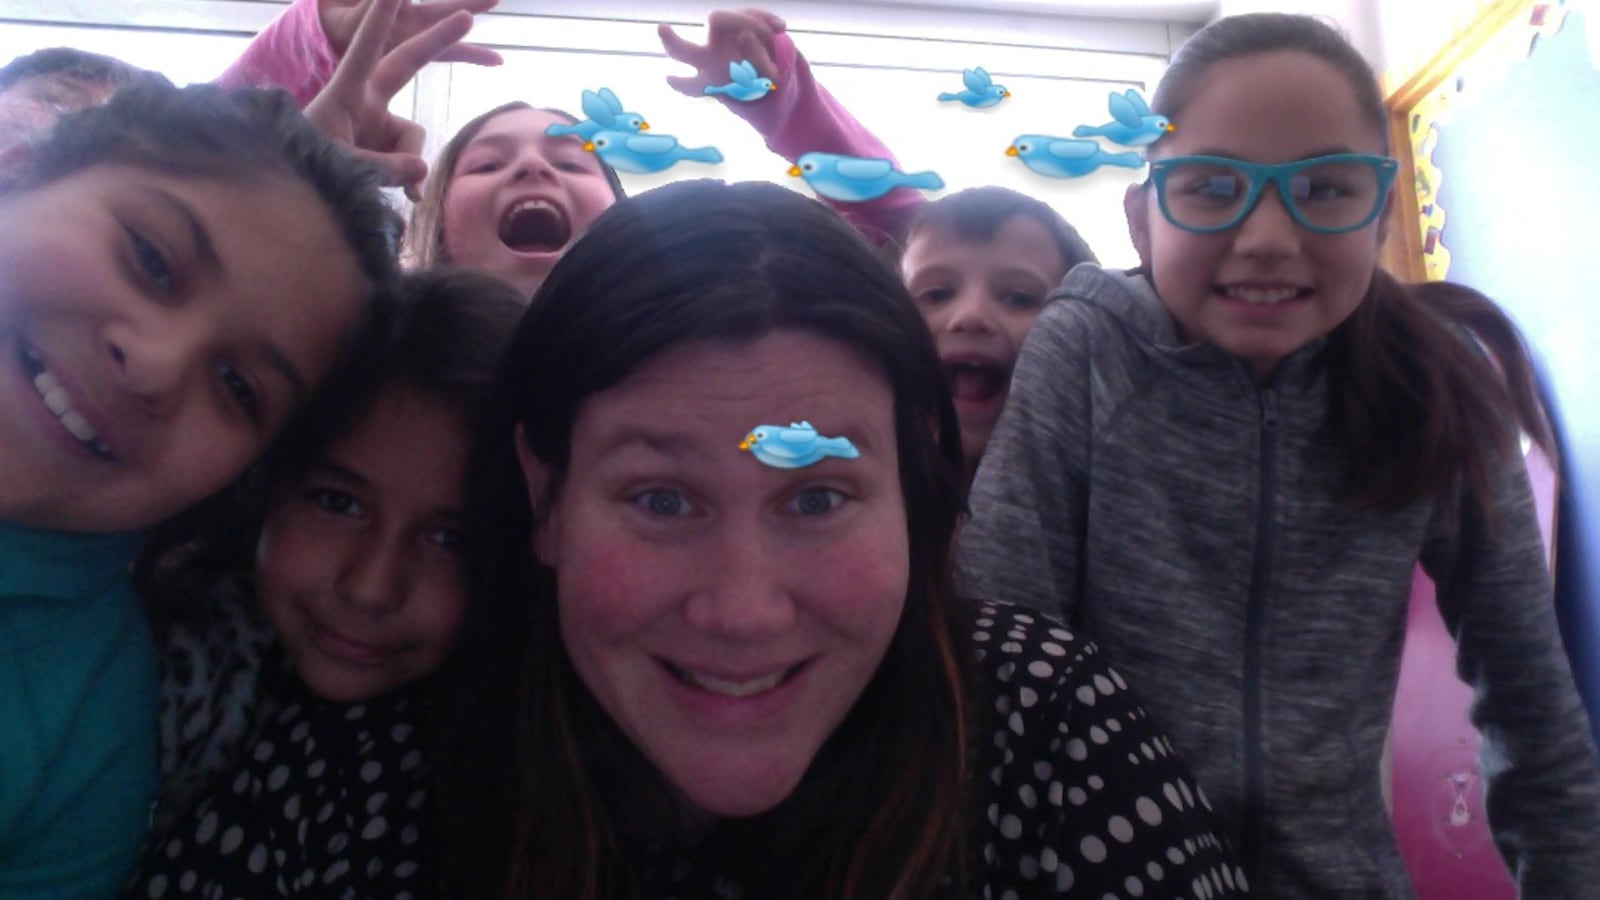 Janine Logar takes a selfie with some of her students using an app that adds cartoons.